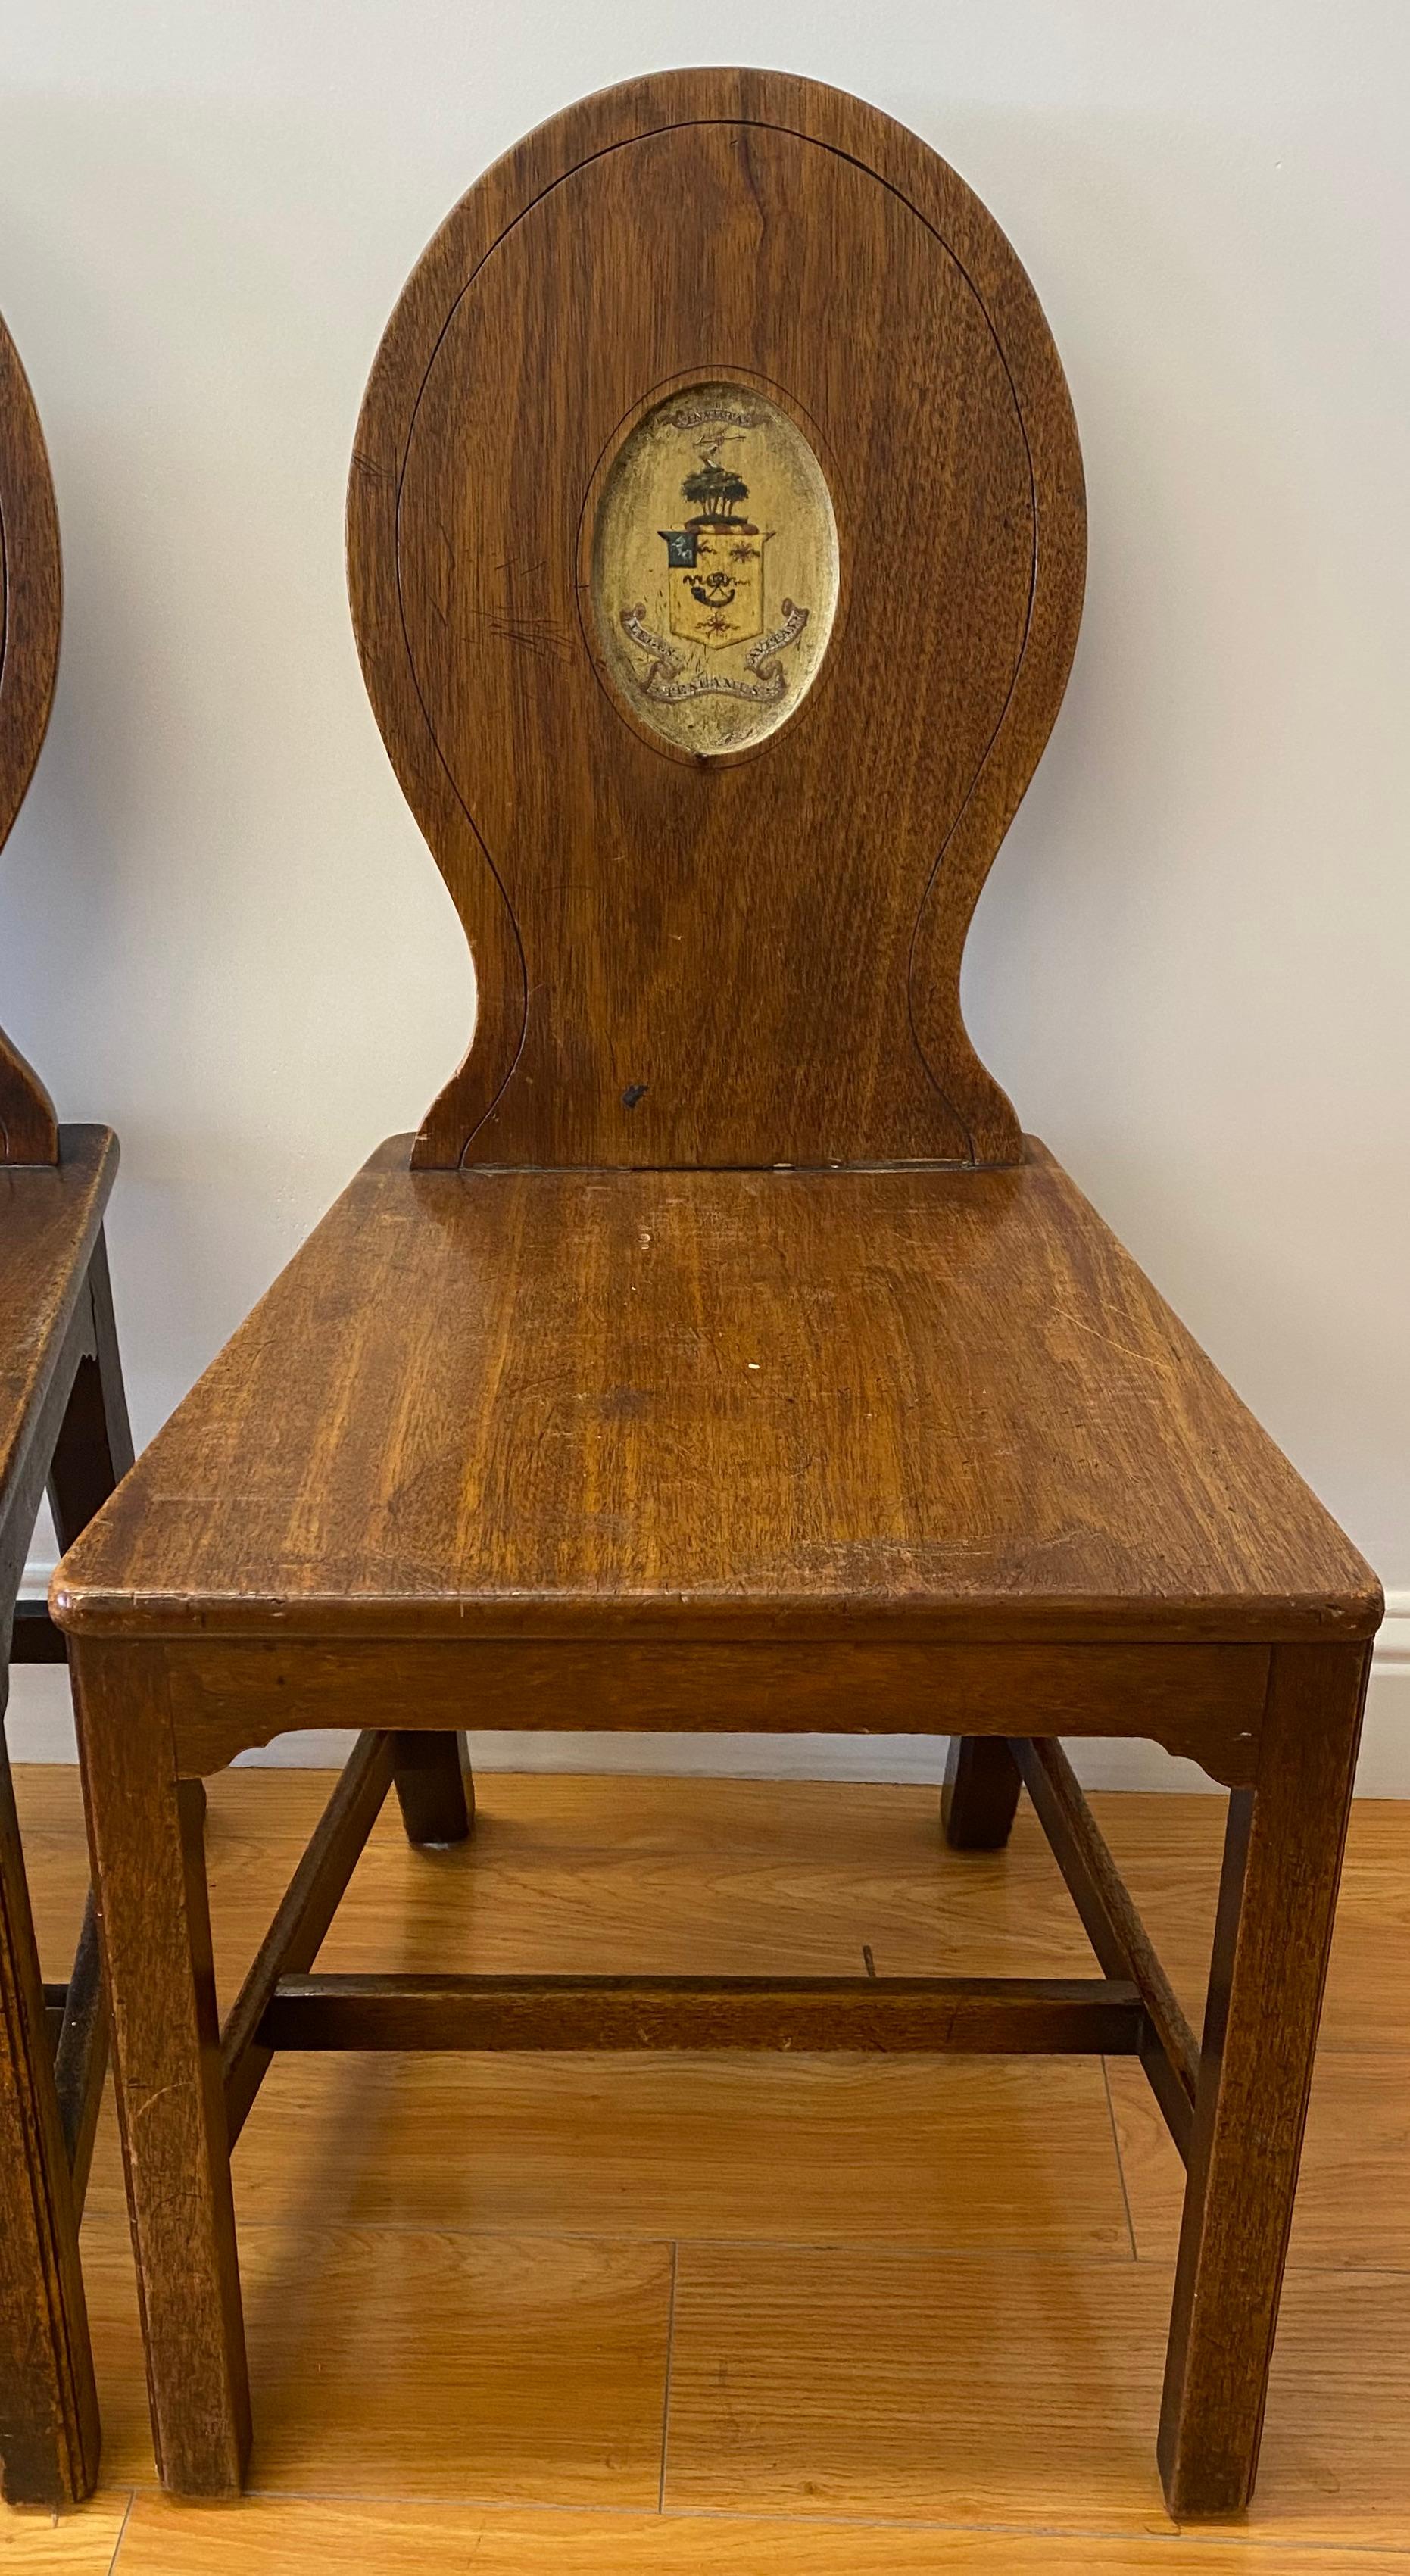 18th-19th century George III European walnut hall chairs

Handsome pair of handcrafted custom made hall chairs

Each chair has a plank seat and back fitted with a wedge joint

Measures: 18.25